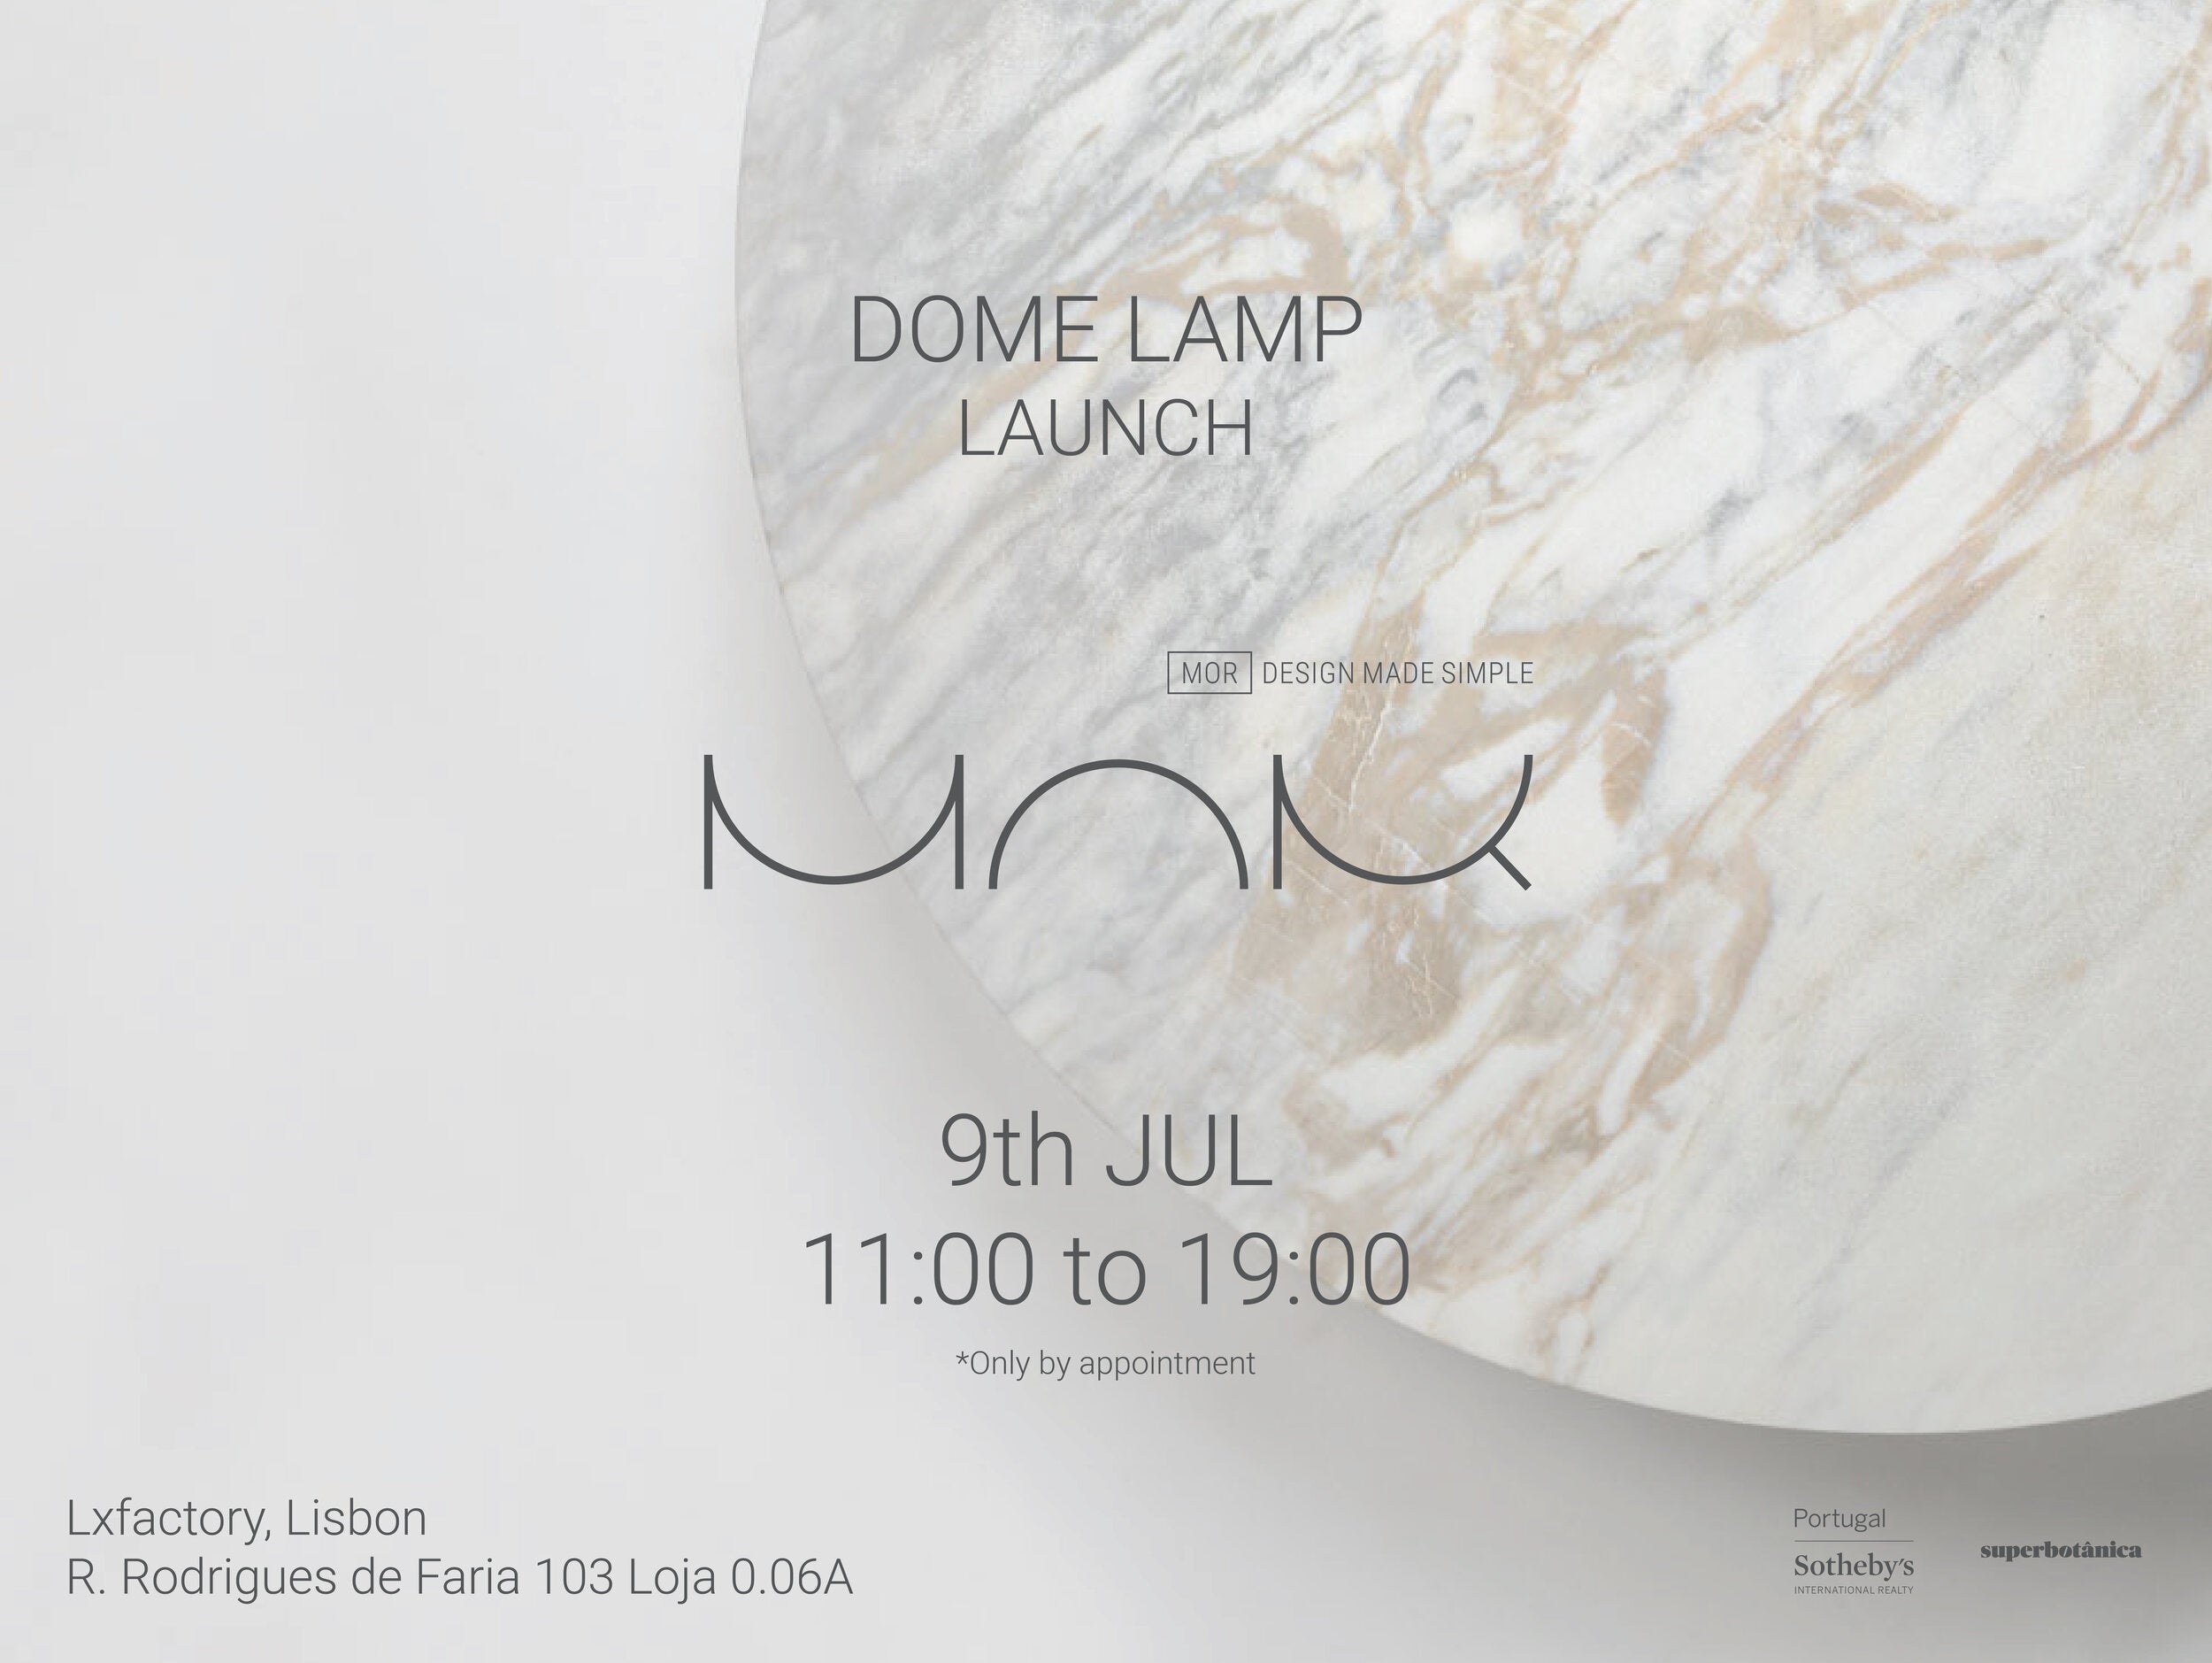 DOME lamp launch